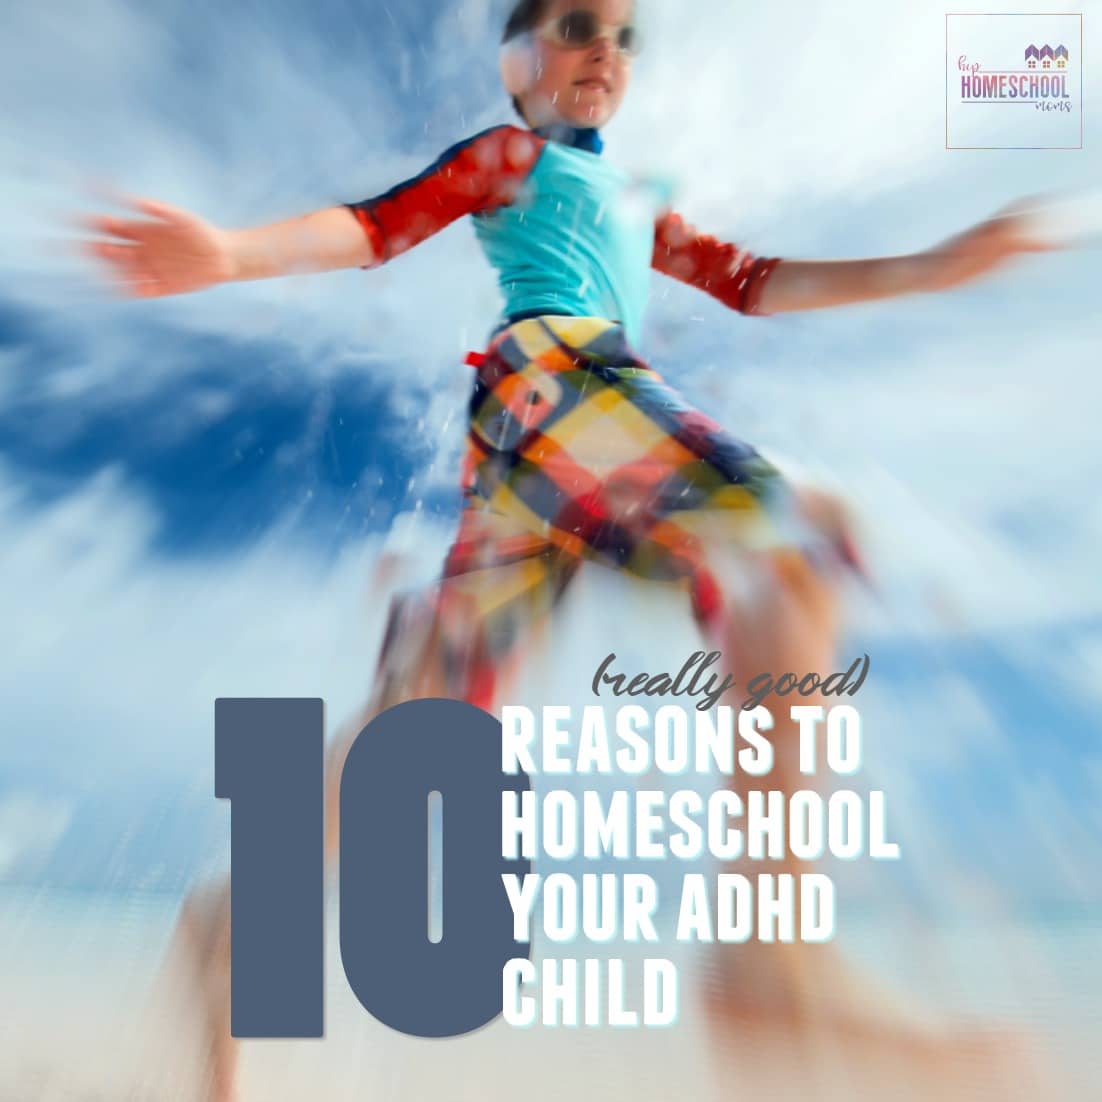 10 Reasons to Homeschool your ADHD Child